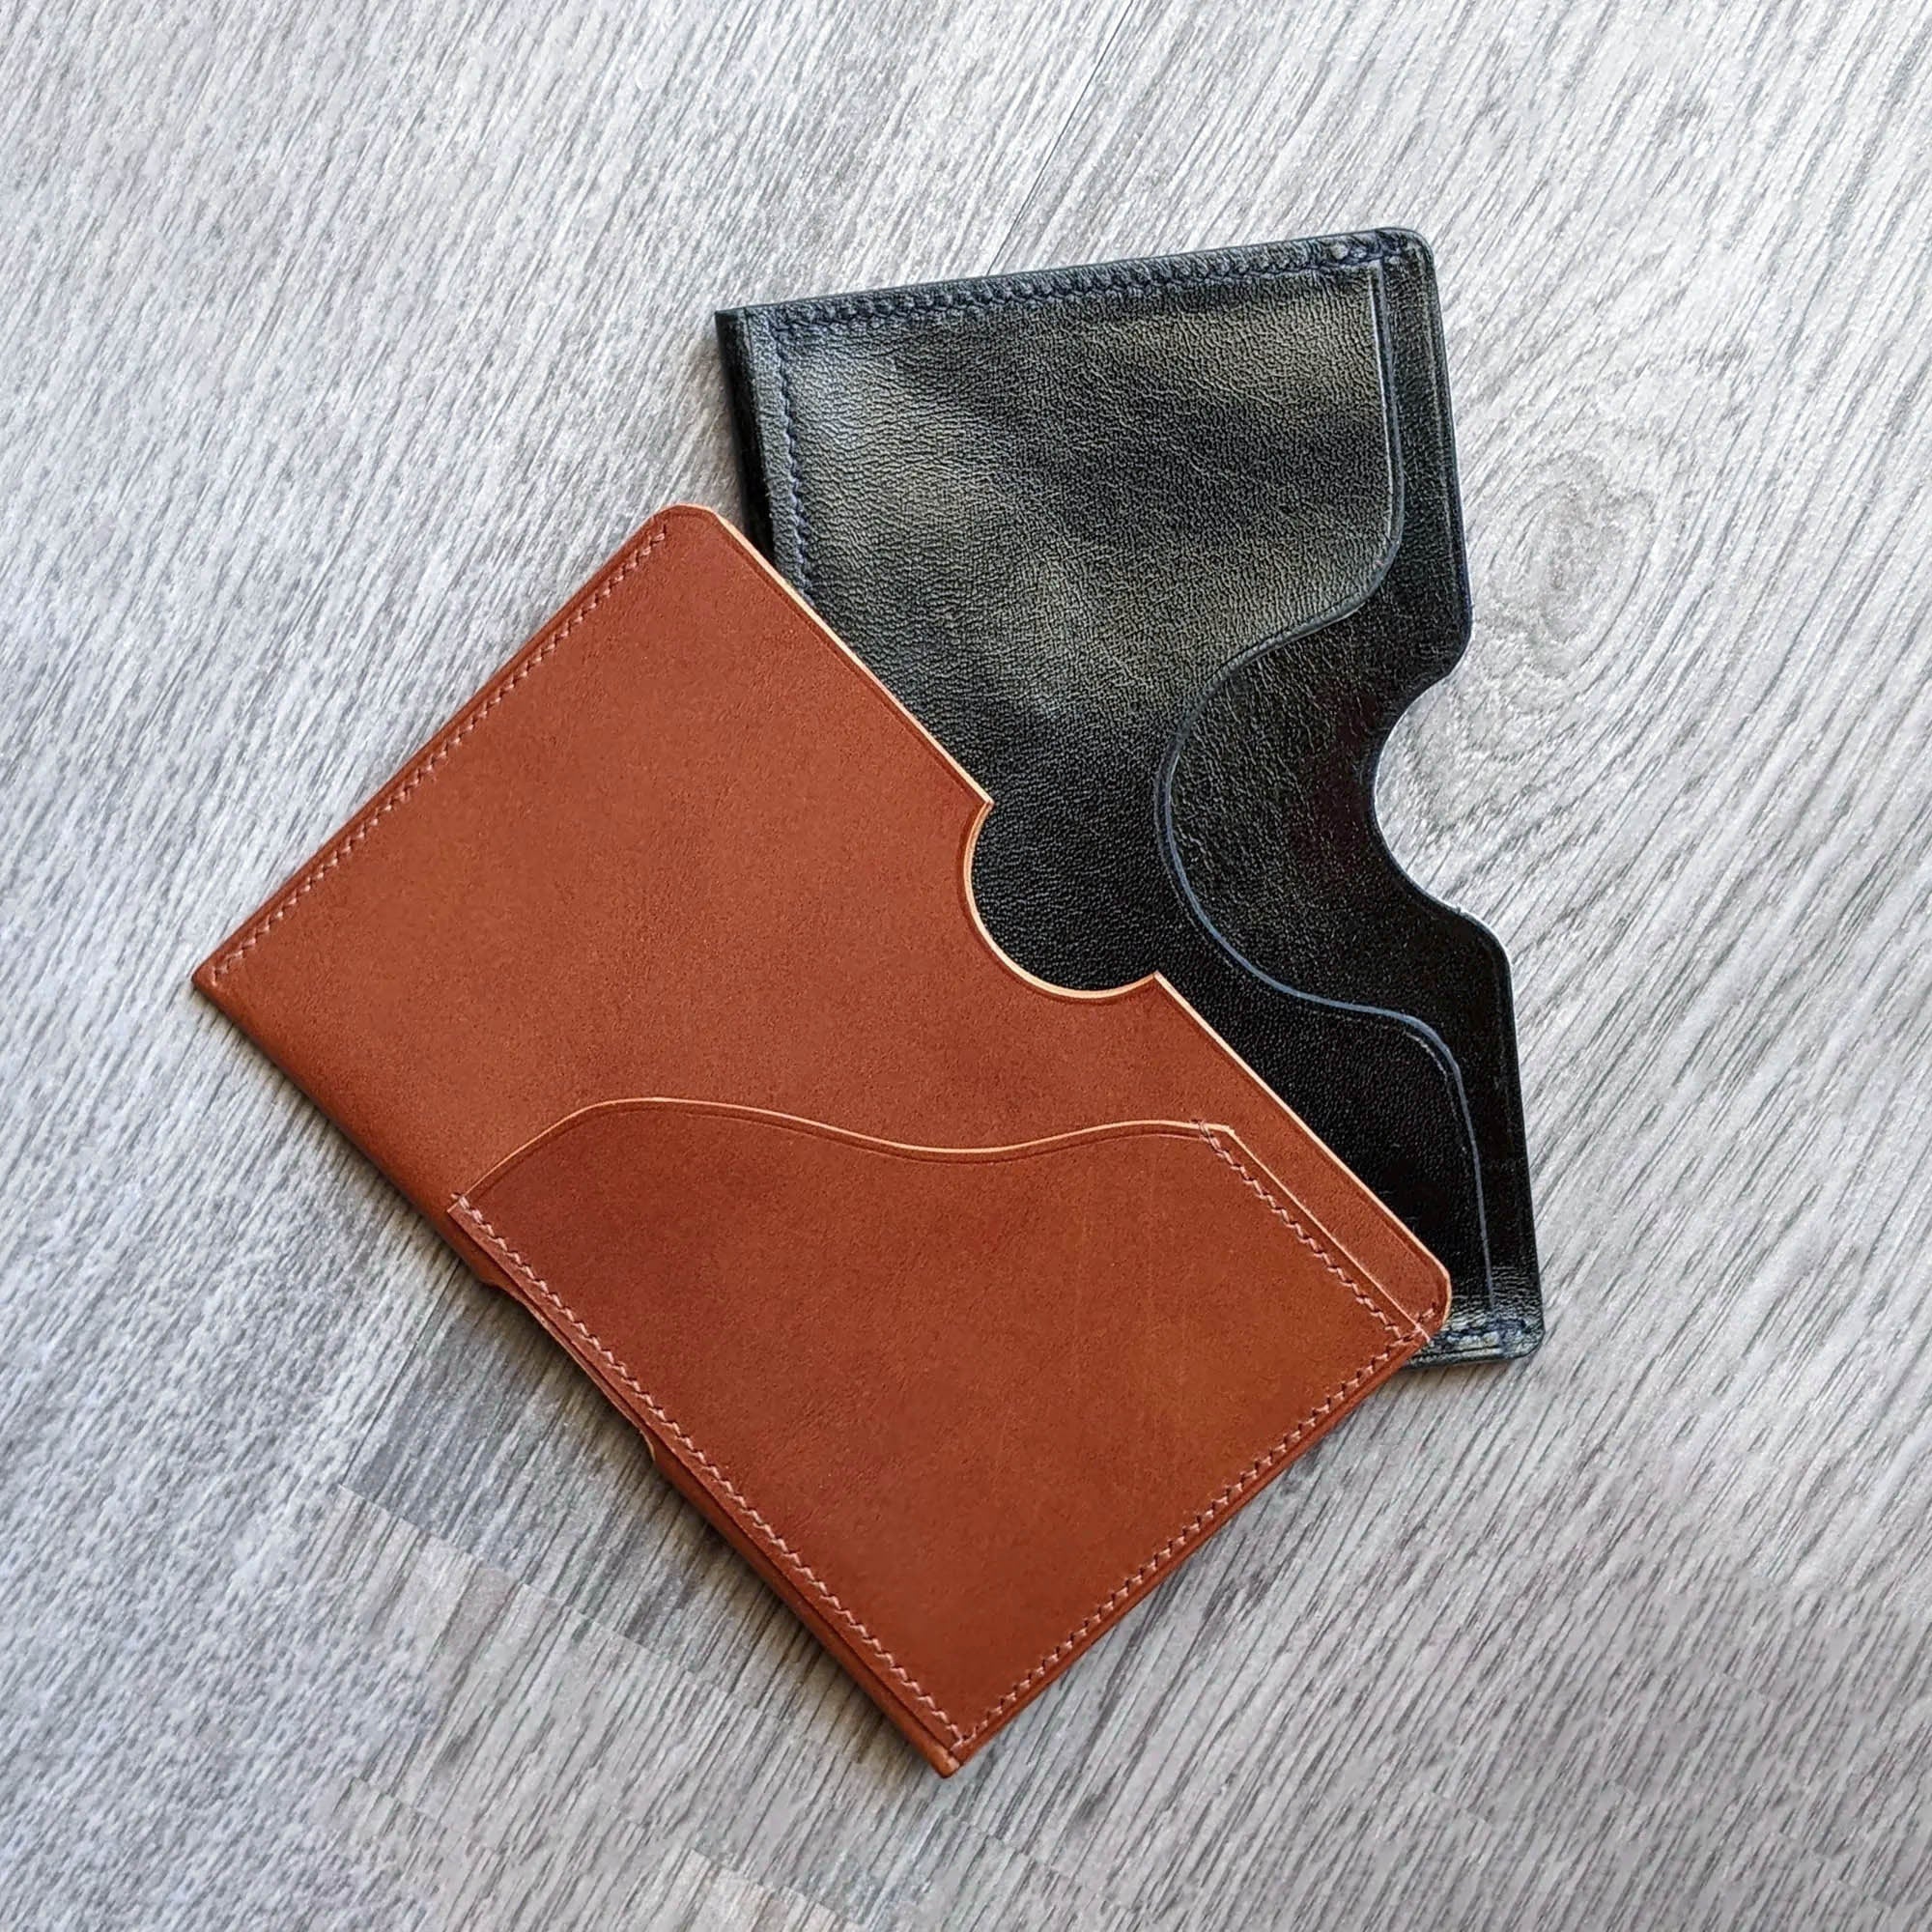 Full Grain Leather Passport Holder Cover Case Bag - China Leather